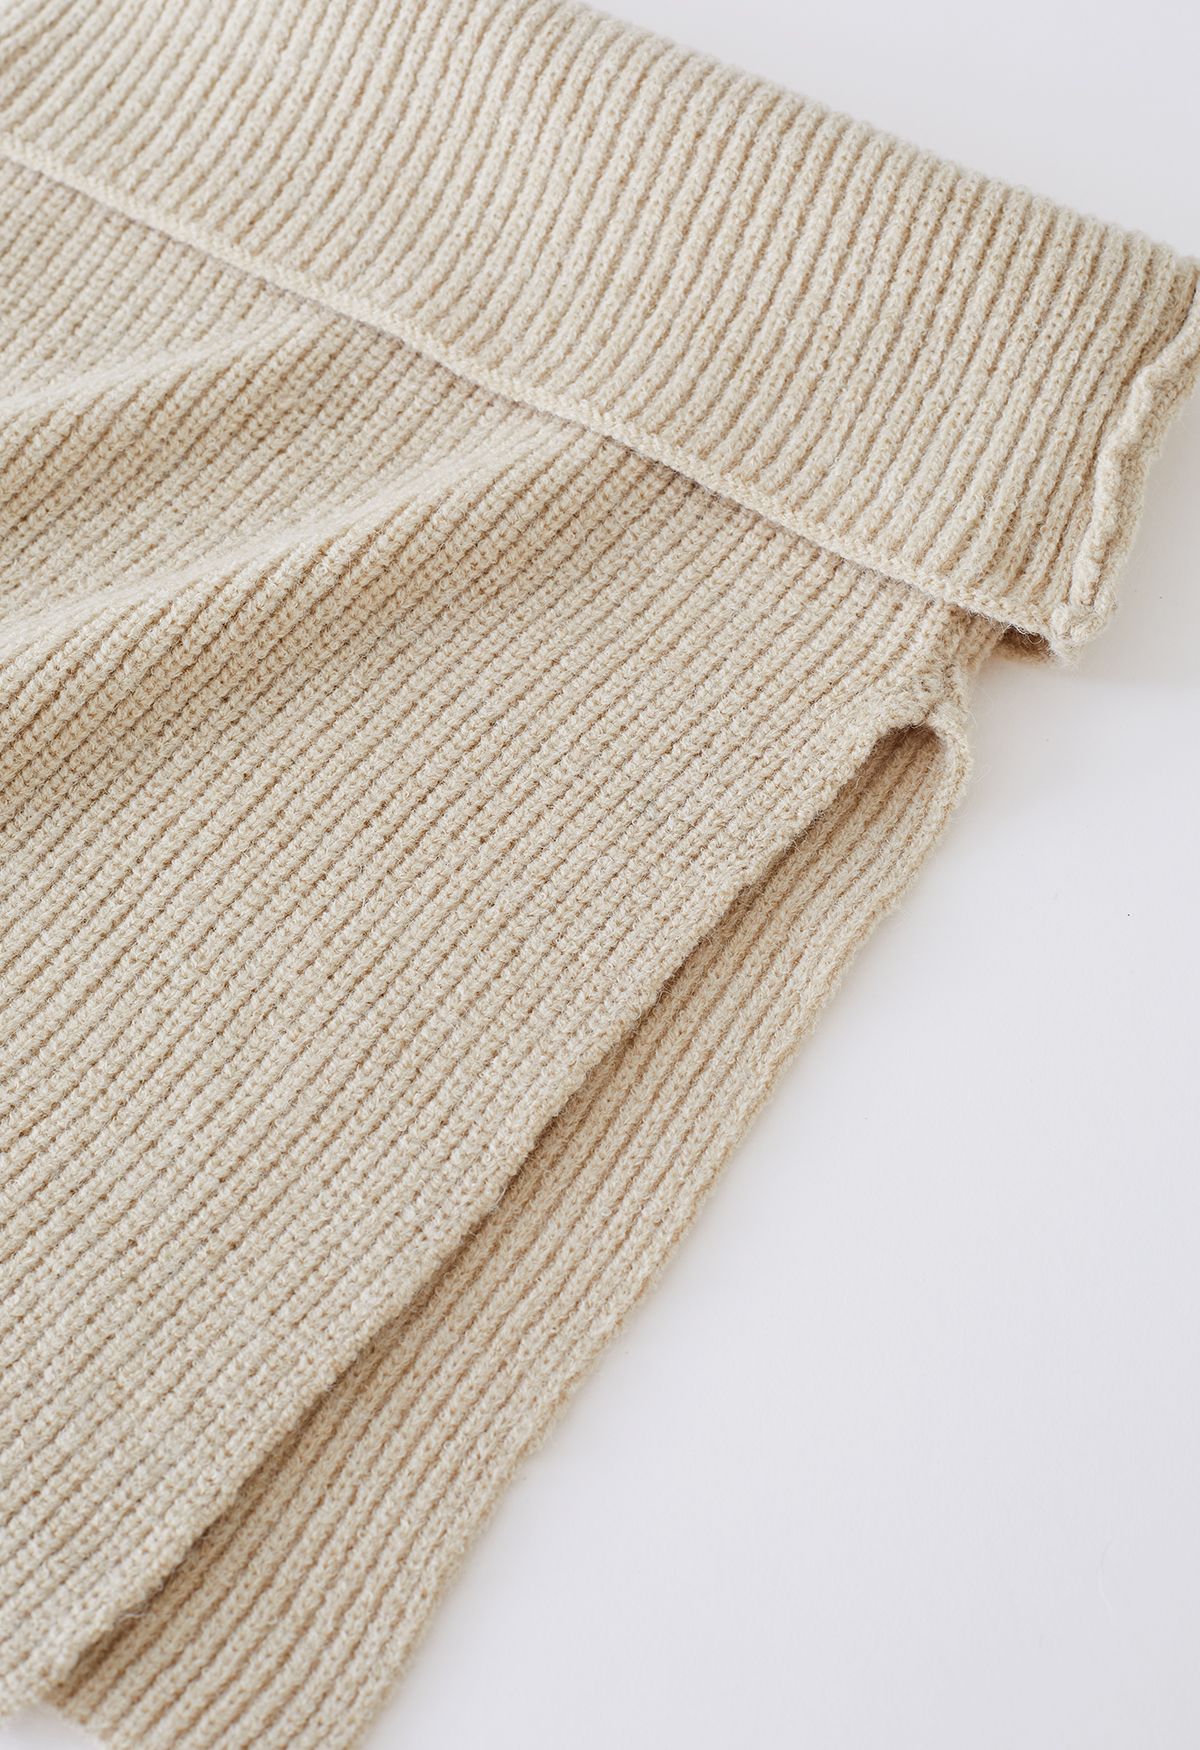 Rippstrickpullover mit abnehmbarem Schal in Oatmeal